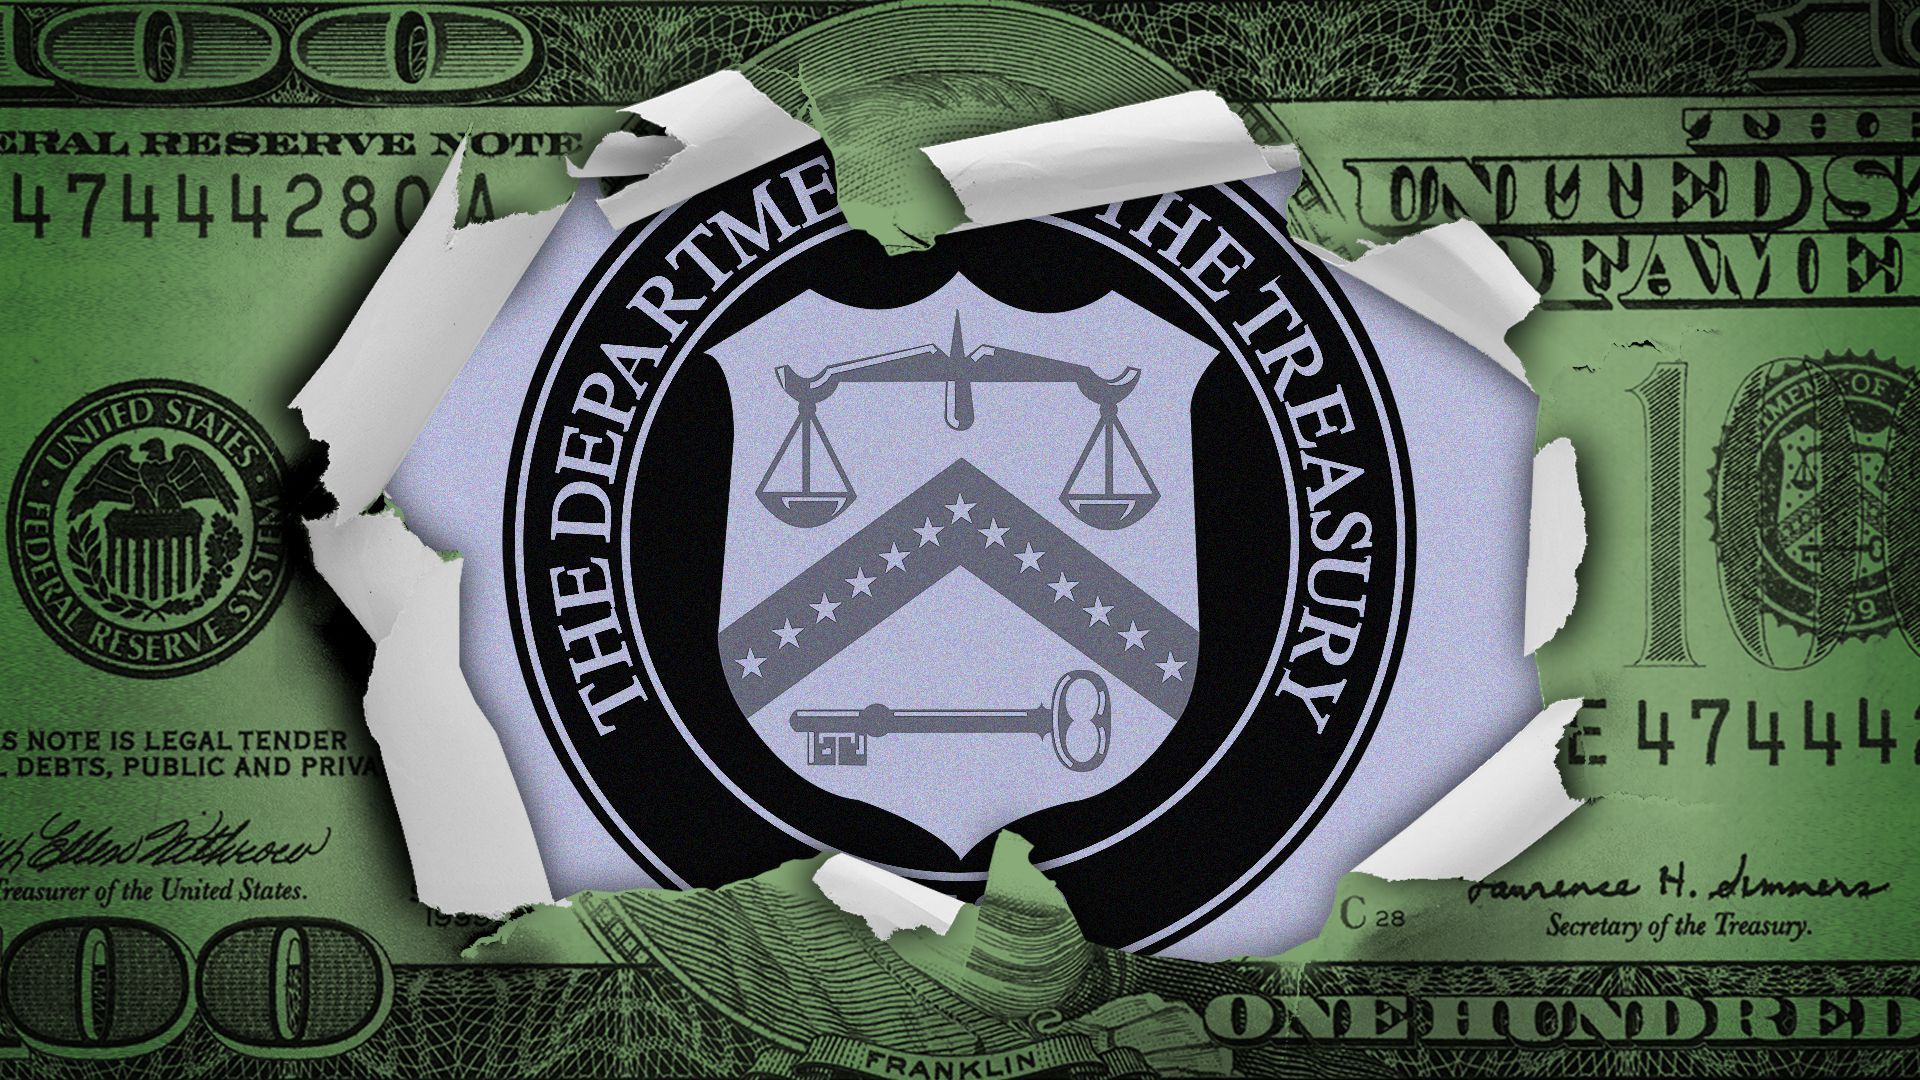 Illustration of a one hundred dollar bill torn at its center revealing the U.S. Treasury seal